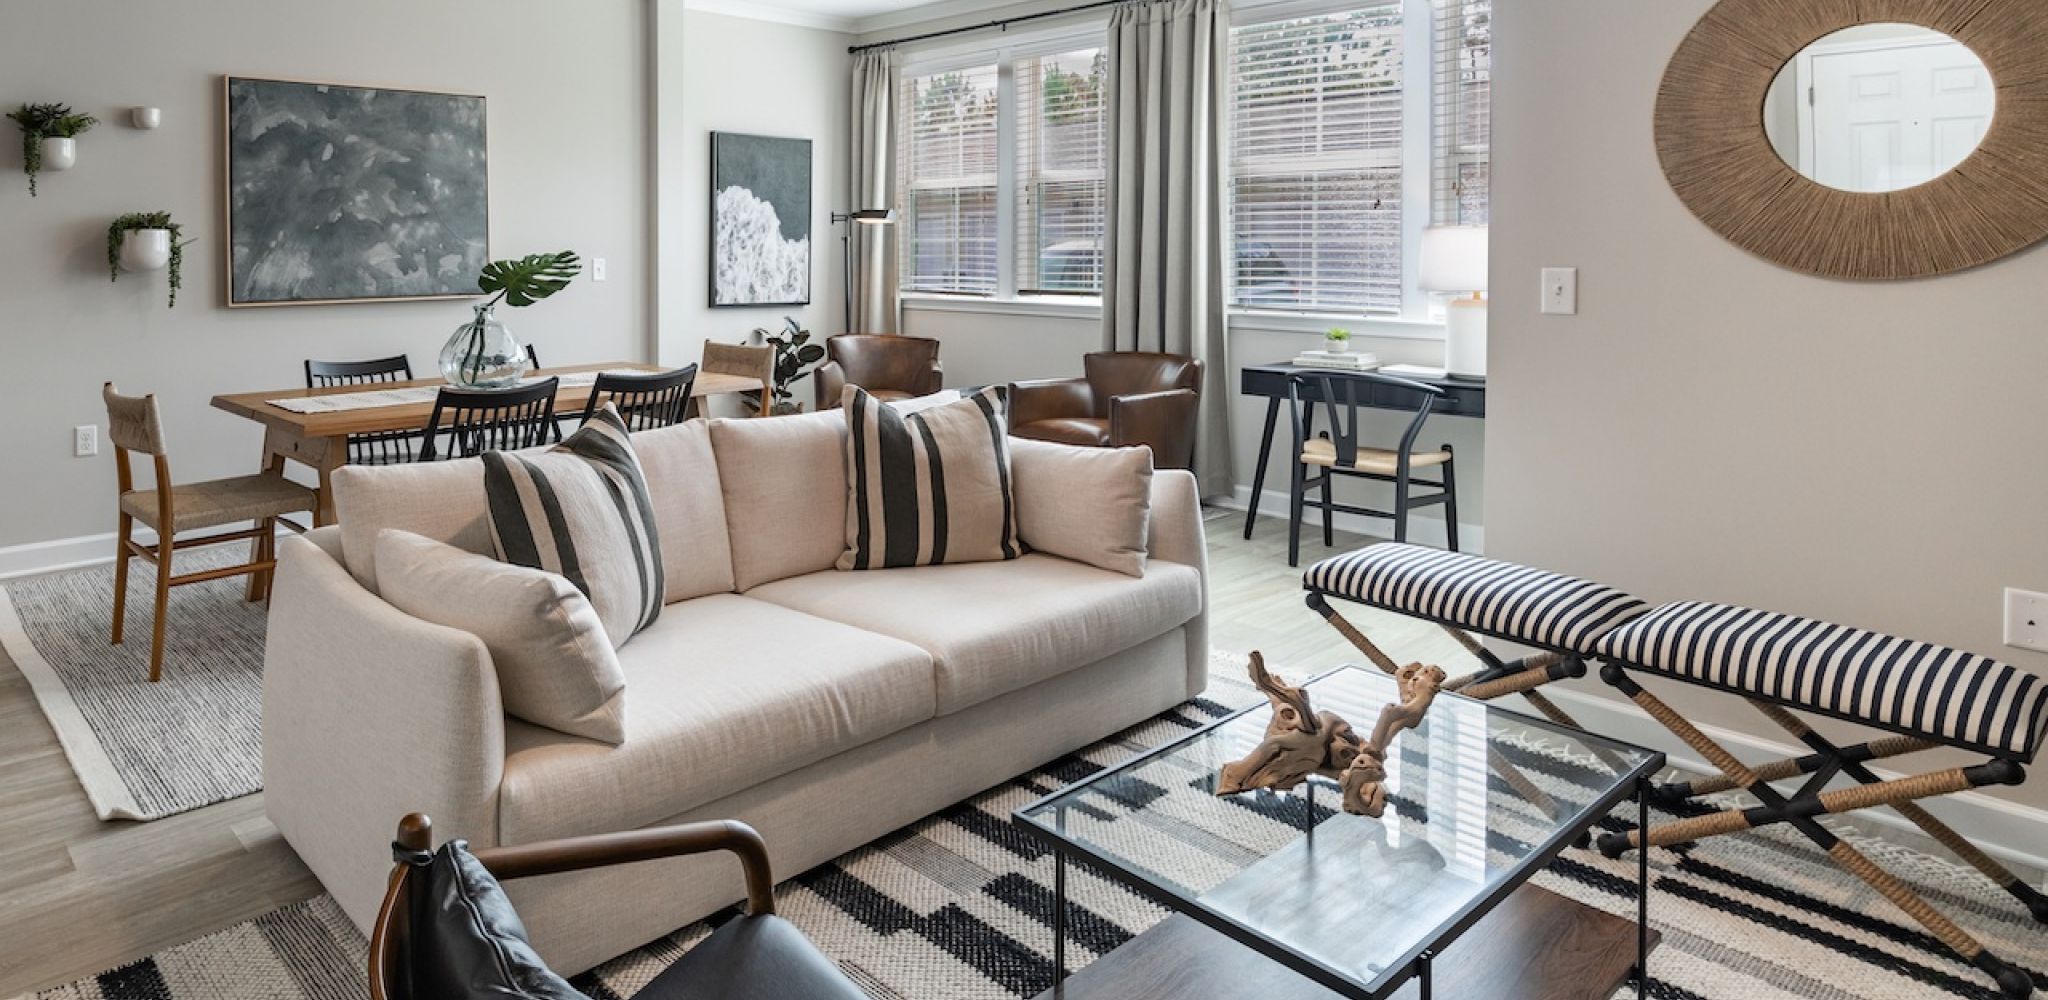 Chic living room leading to a kitchen breakfast bar at Hawthorne at Stillwater apartments, showcasing the spacious interiors in Sneads Ferry.